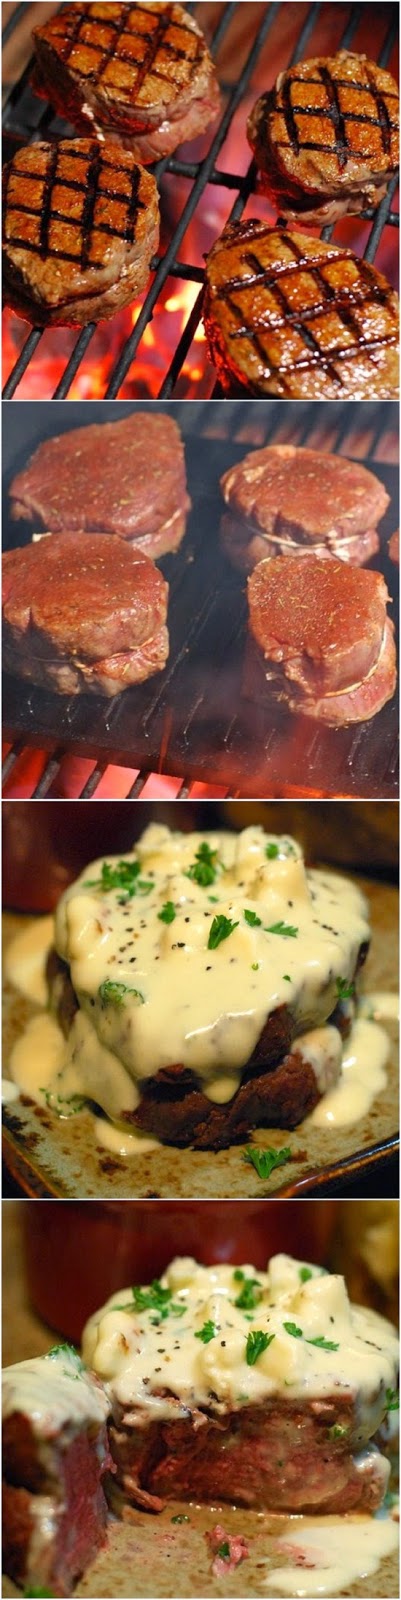 Beef-Fillet-with-Gorgonzola-Sauce-Recipe